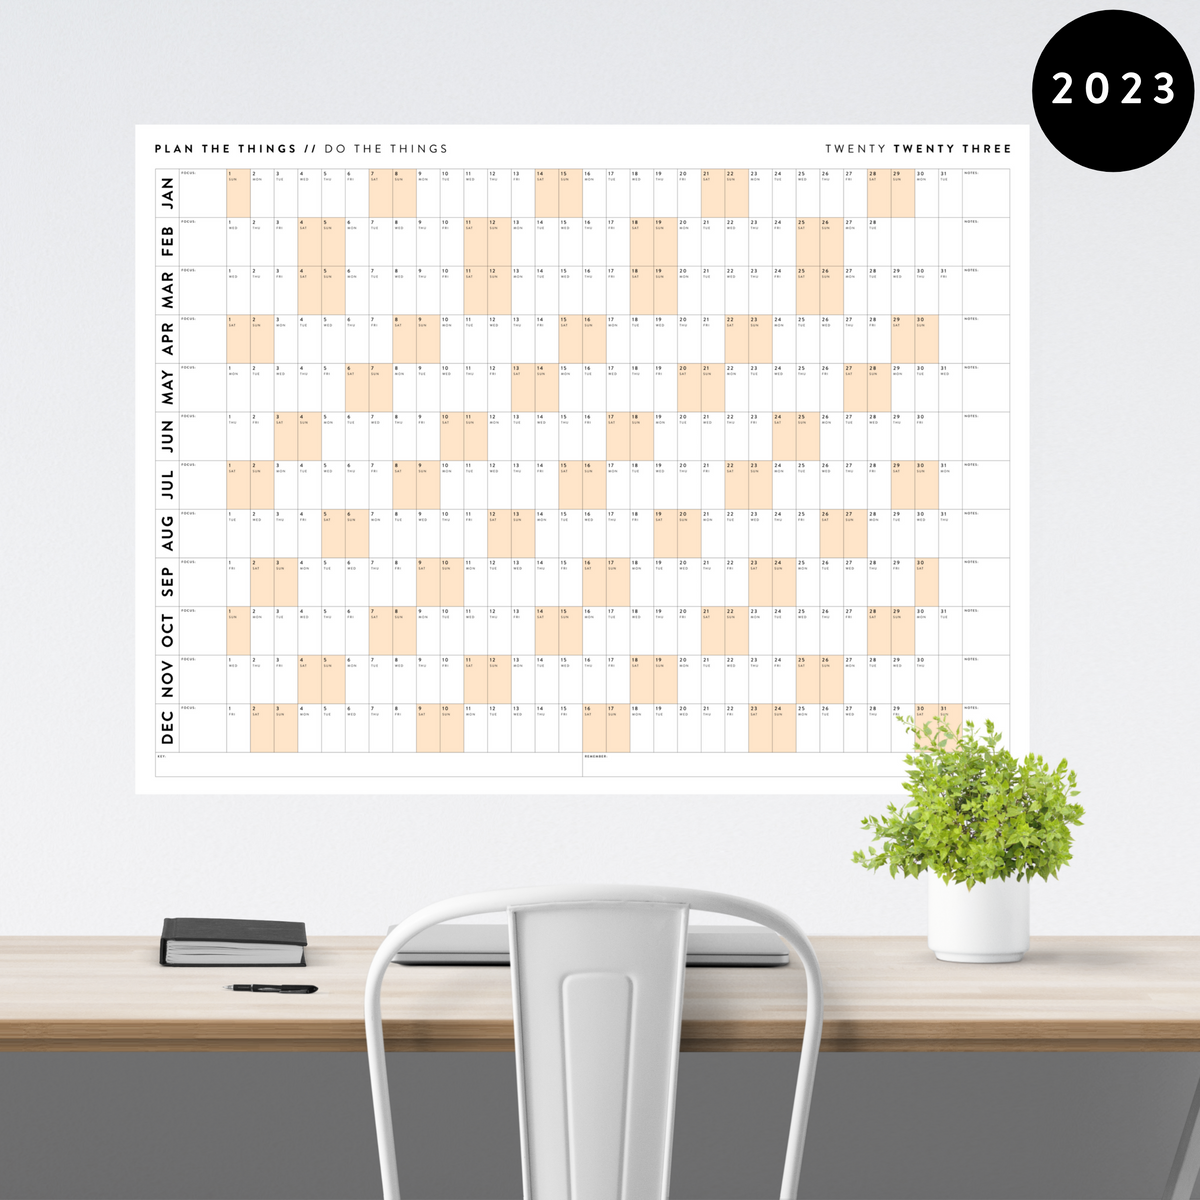 2023 GIANT WALL CALENDARS - Plan The Things